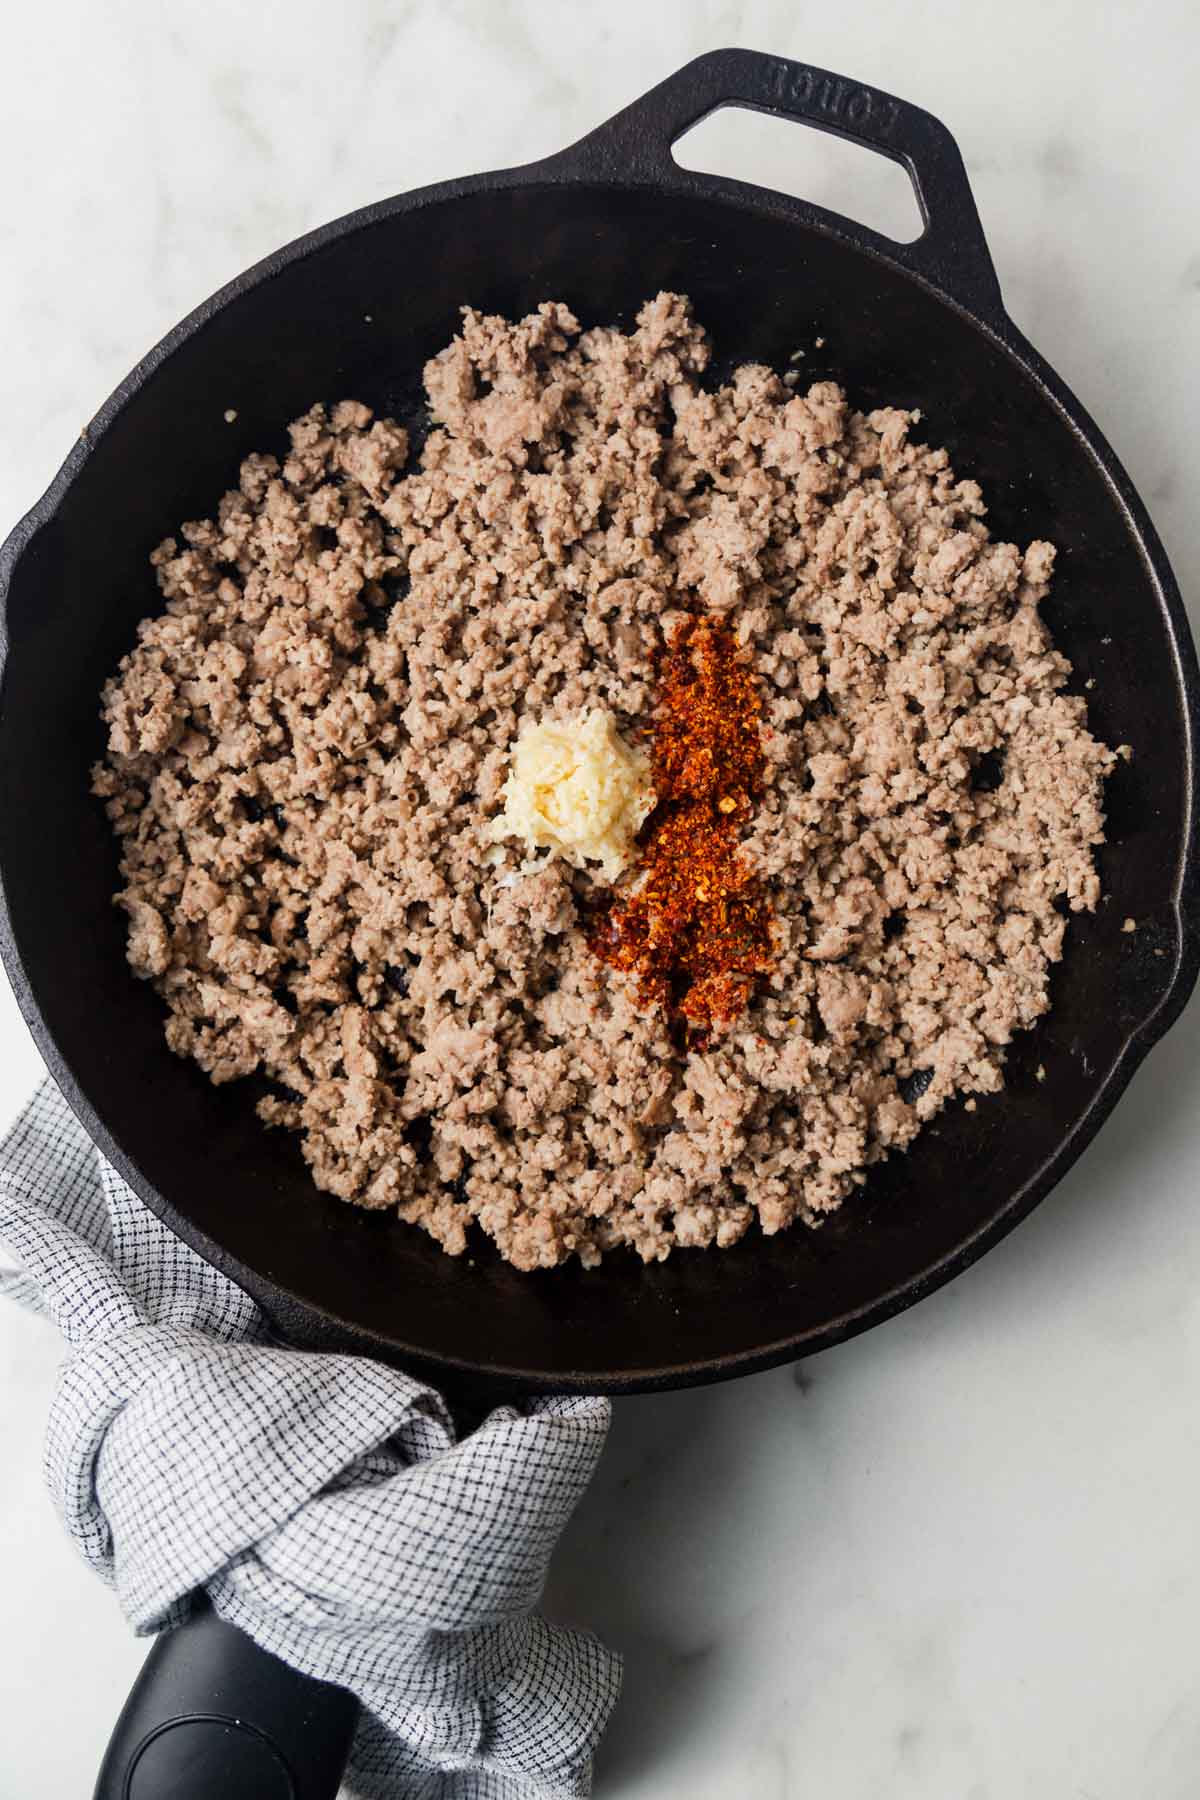 Cooked ground beef in a skillet with minced garlic and chili flakes.